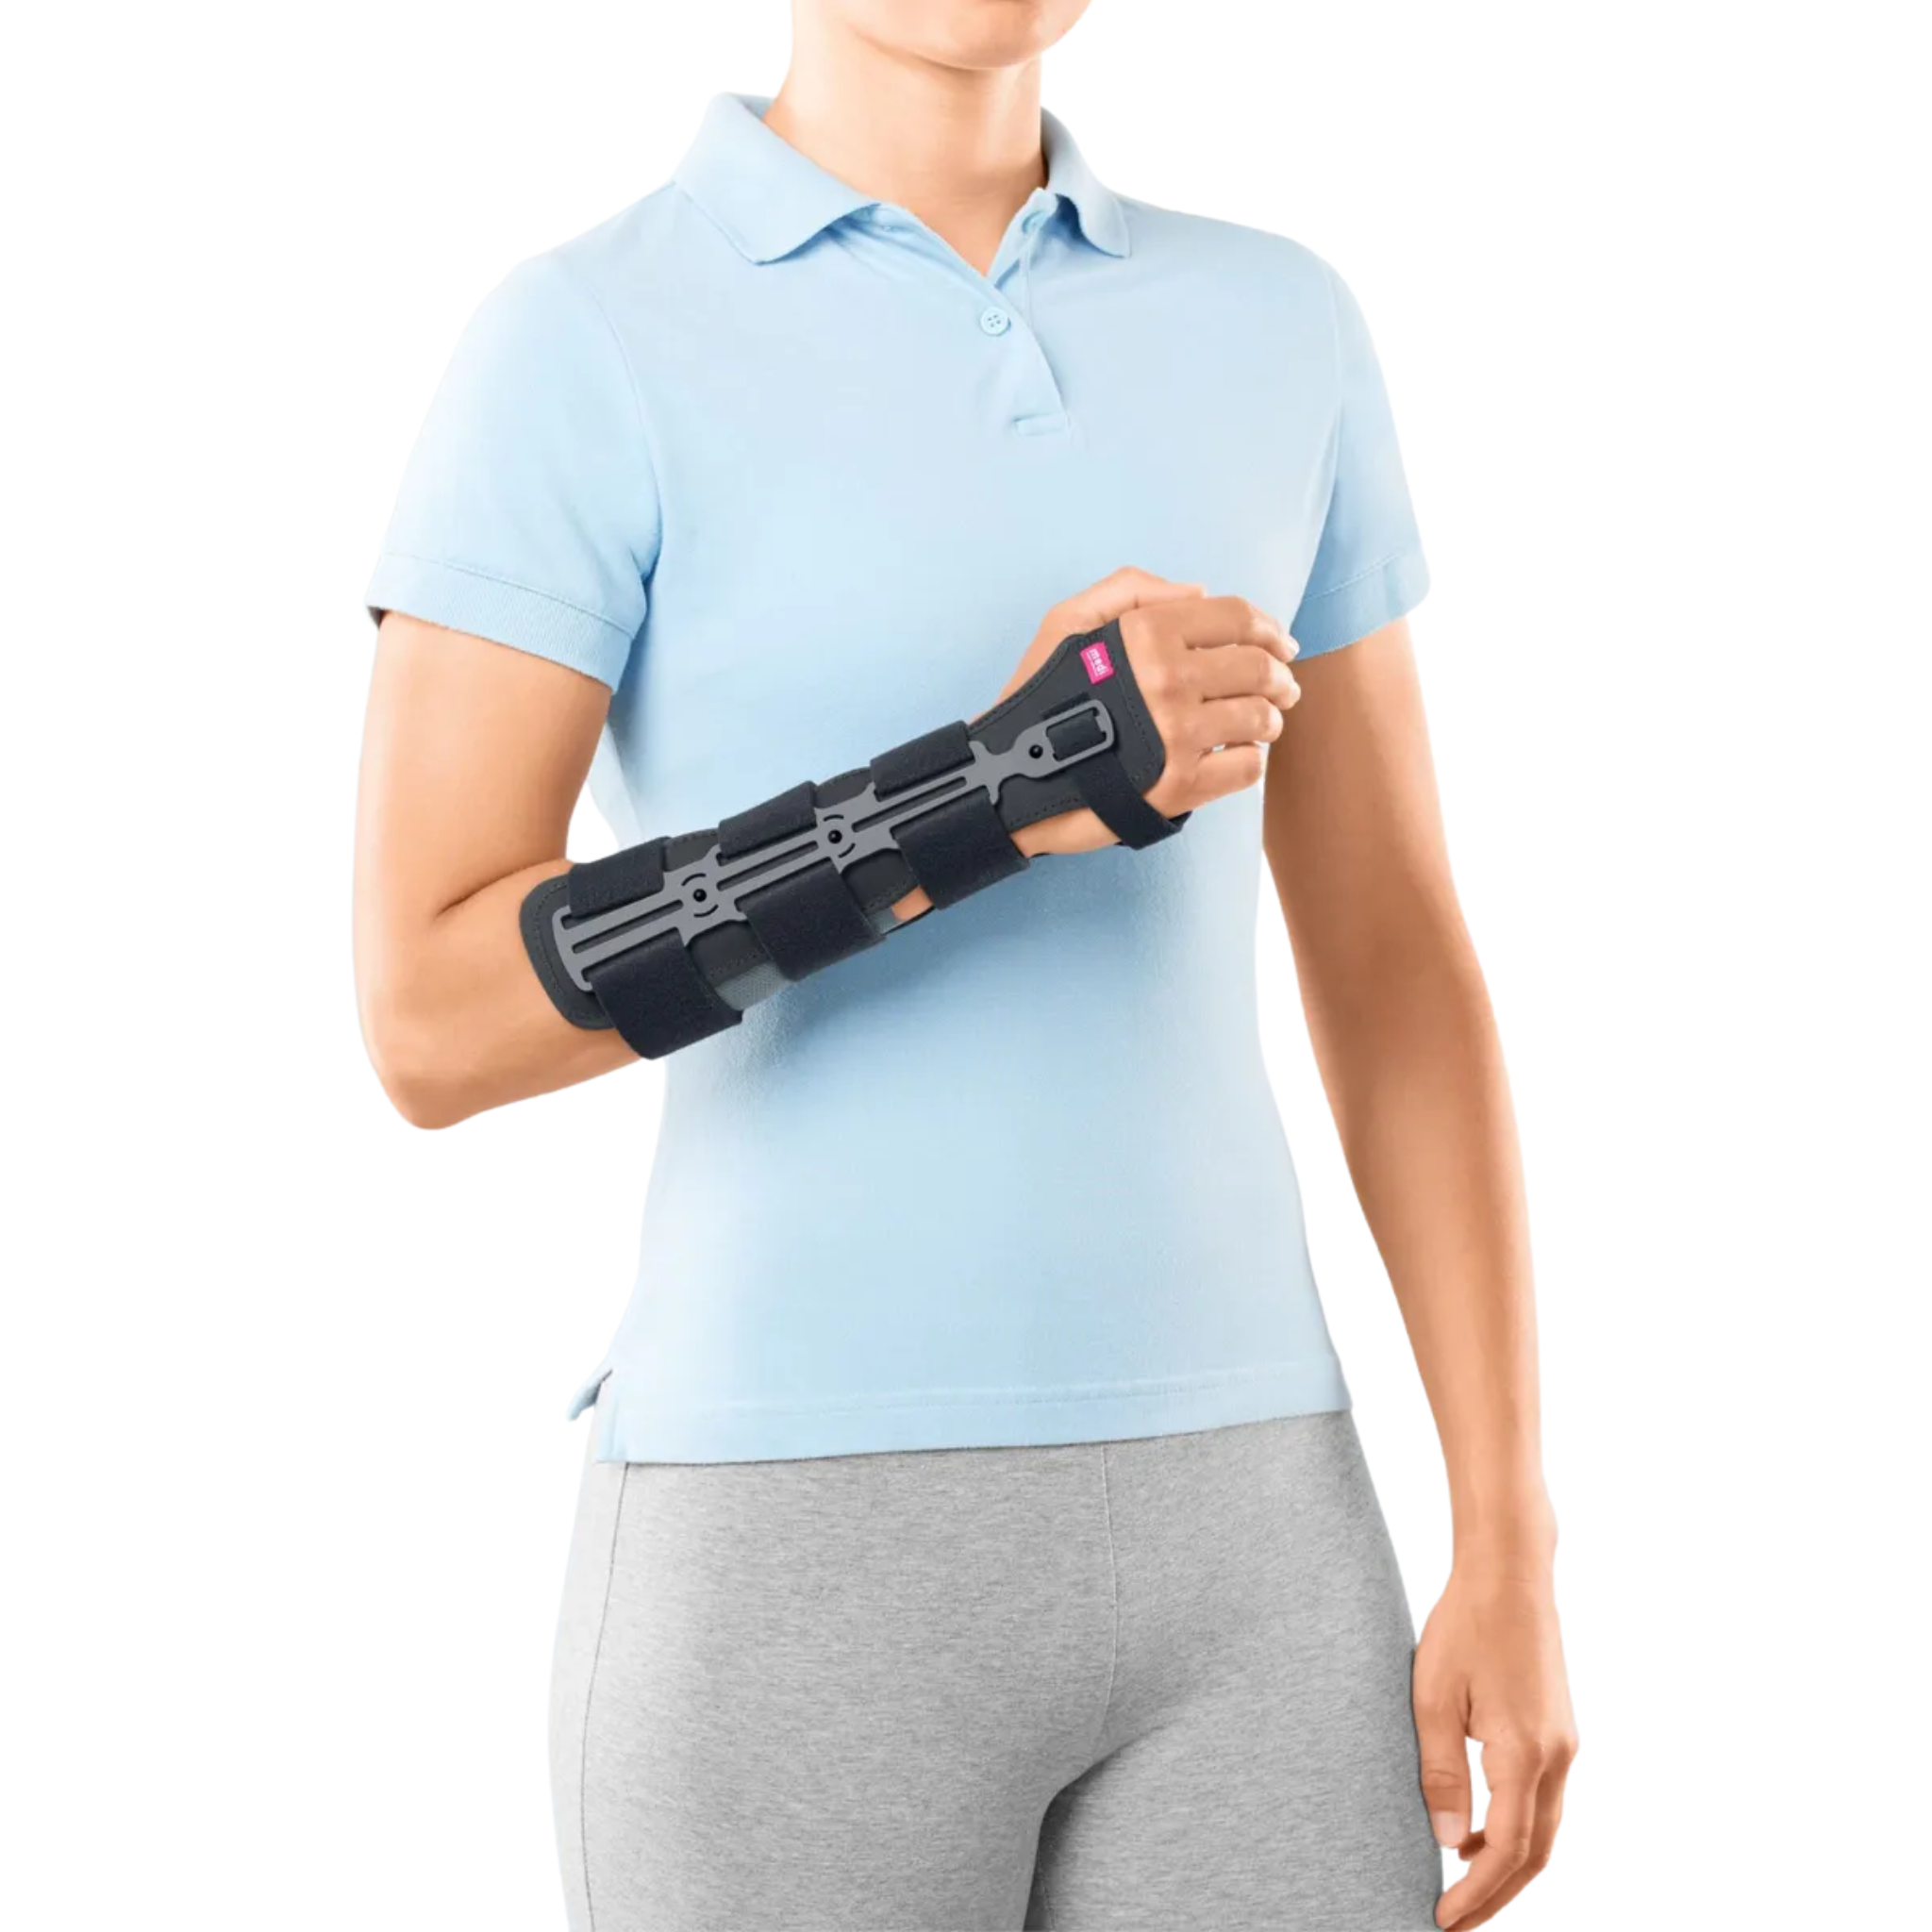 Wrist and Forearm Support Brace | Manumed RFX